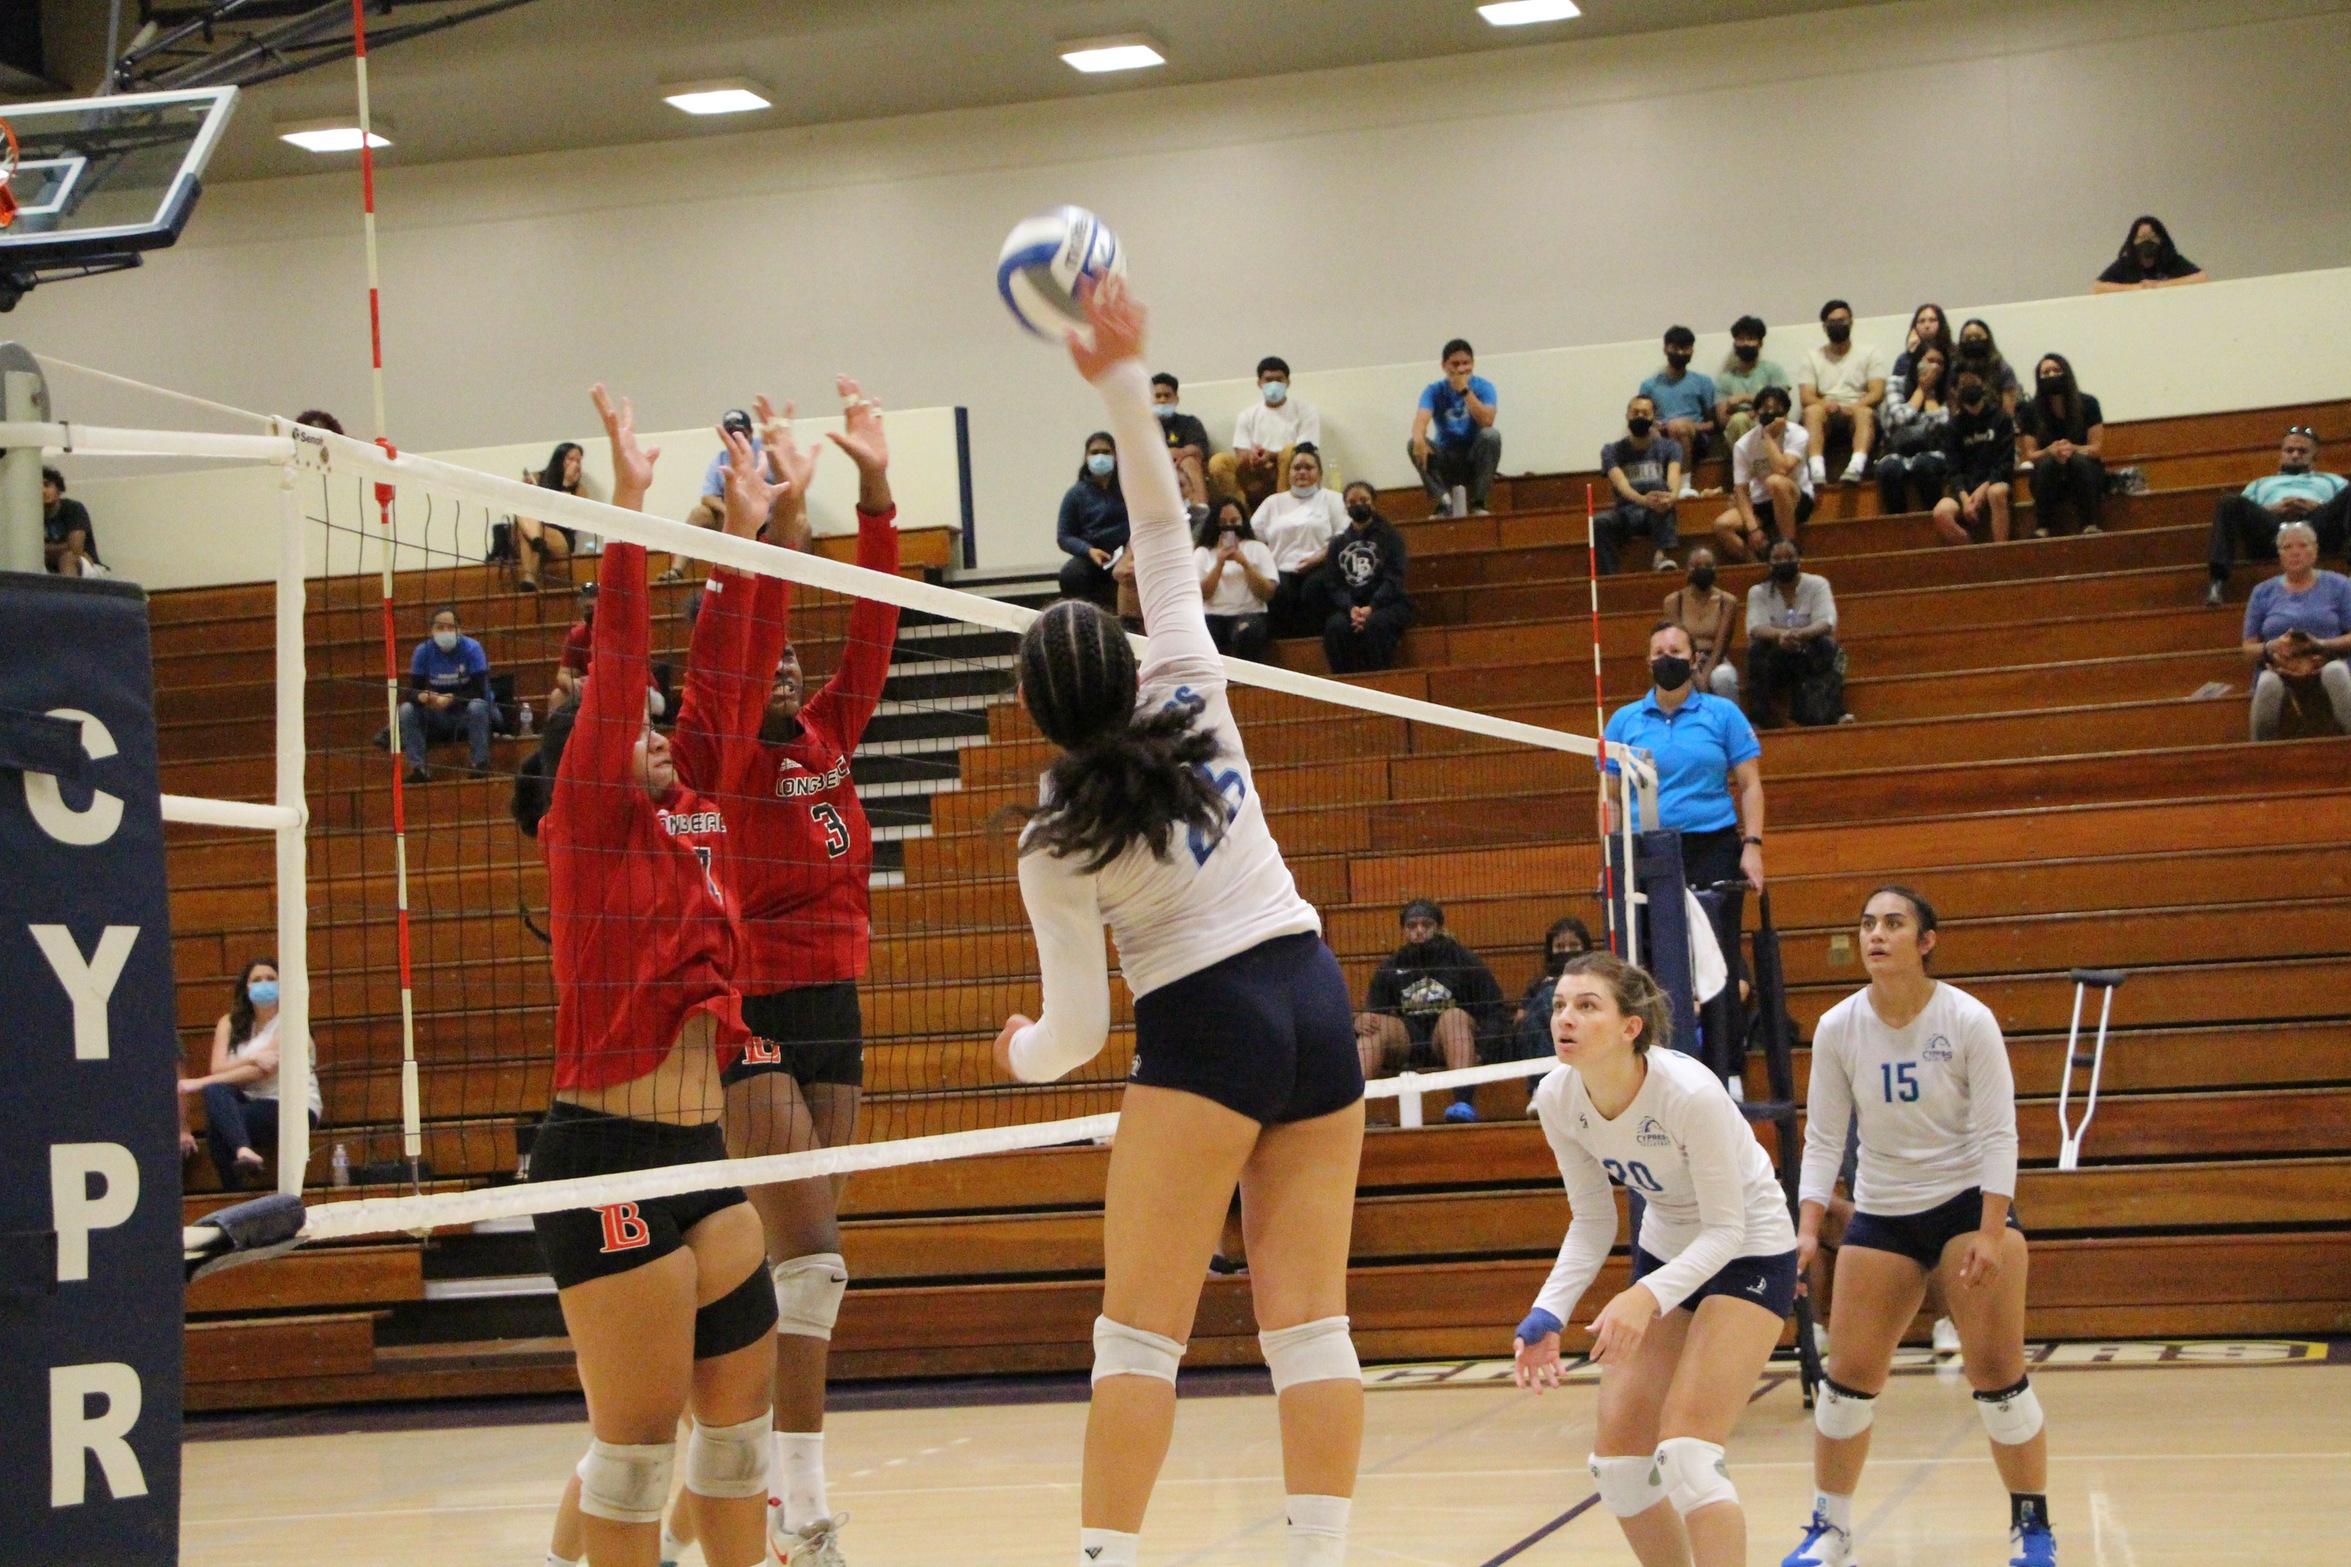 #21 Cypress Volleyball Upsets #14 Long Beach in Four Sets